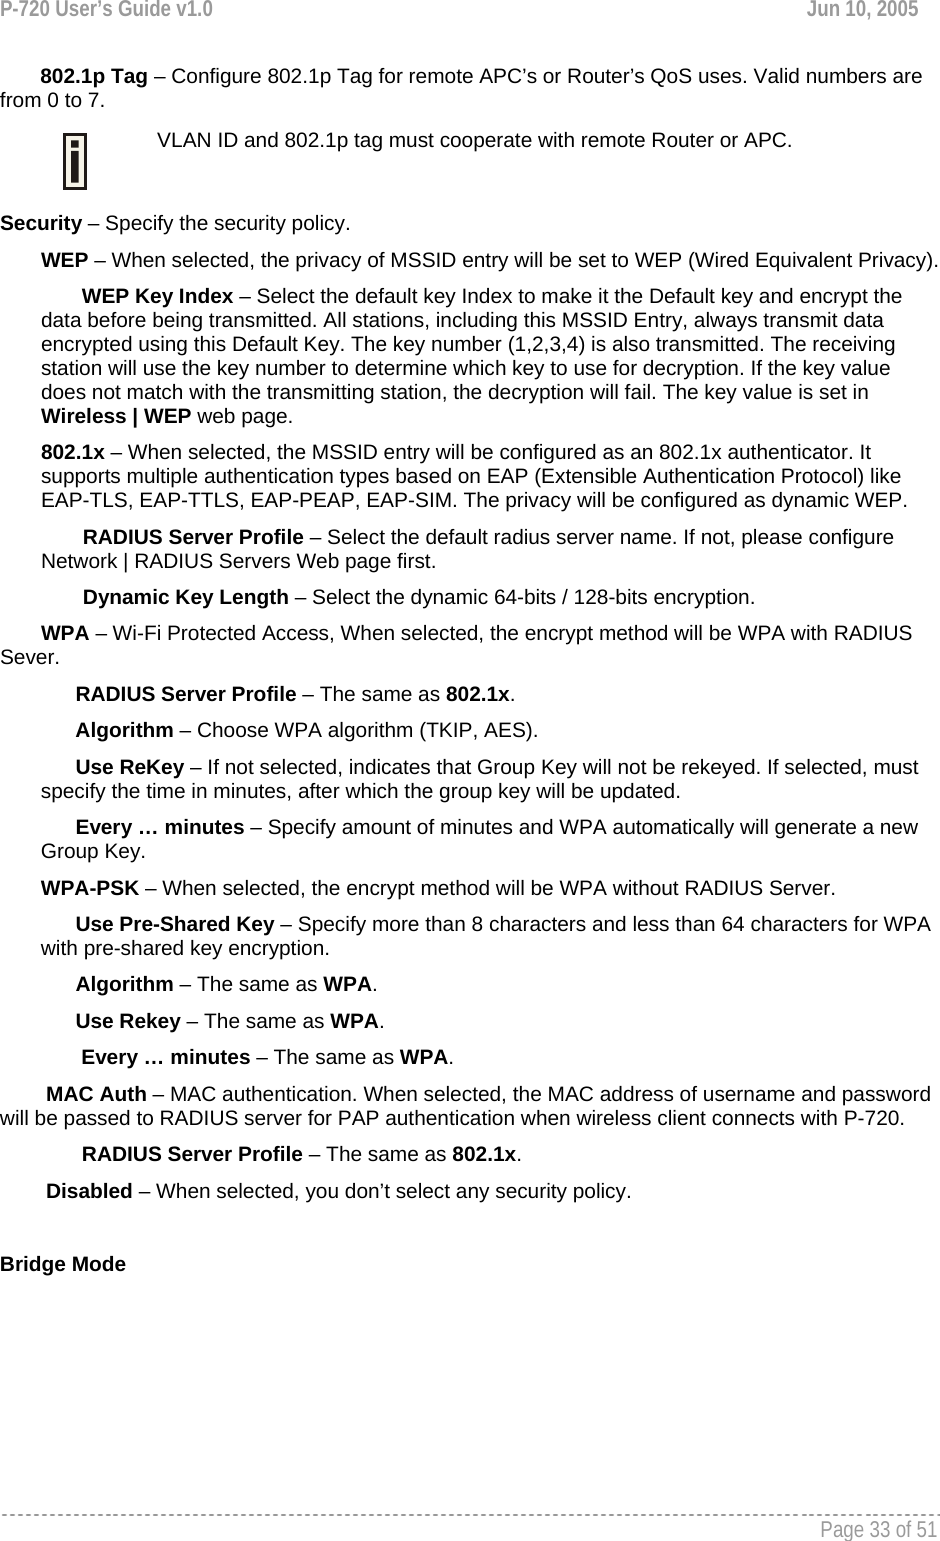 P-720 User’s Guide v1.0  Jun 10, 2005     Page 33 of 51          802.1p Tag – Configure 802.1p Tag for remote APC’s or Router’s QoS uses. Valid numbers are from 0 to 7.   VLAN ID and 802.1p tag must cooperate with remote Router or APC.  Security – Specify the security policy. WEP – When selected, the privacy of MSSID entry will be set to WEP (Wired Equivalent Privacy). WEP Key Index – Select the default key Index to make it the Default key and encrypt the data before being transmitted. All stations, including this MSSID Entry, always transmit data encrypted using this Default Key. The key number (1,2,3,4) is also transmitted. The receiving station will use the key number to determine which key to use for decryption. If the key value does not match with the transmitting station, the decryption will fail. The key value is set in Wireless | WEP web page. 802.1x – When selected, the MSSID entry will be configured as an 802.1x authenticator. It supports multiple authentication types based on EAP (Extensible Authentication Protocol) like EAP-TLS, EAP-TTLS, EAP-PEAP, EAP-SIM. The privacy will be configured as dynamic WEP. RADIUS Server Profile – Select the default radius server name. If not, please configure Network | RADIUS Servers Web page first. Dynamic Key Length – Select the dynamic 64-bits / 128-bits encryption. WPA – Wi-Fi Protected Access, When selected, the encrypt method will be WPA with RADIUS Sever.       RADIUS Server Profile – The same as 802.1x.       Algorithm – Choose WPA algorithm (TKIP, AES).       Use ReKey – If not selected, indicates that Group Key will not be rekeyed. If selected, must specify the time in minutes, after which the group key will be updated.       Every … minutes – Specify amount of minutes and WPA automatically will generate a new Group Key. WPA-PSK – When selected, the encrypt method will be WPA without RADIUS Server.       Use Pre-Shared Key – Specify more than 8 characters and less than 64 characters for WPA with pre-shared key encryption.       Algorithm – The same as WPA.       Use Rekey – The same as WPA. Every … minutes – The same as WPA.         MAC Auth – MAC authentication. When selected, the MAC address of username and password will be passed to RADIUS server for PAP authentication when wireless client connects with P-720.  RADIUS Server Profile – The same as 802.1x.         Disabled – When selected, you don’t select any security policy.  Bridge Mode 